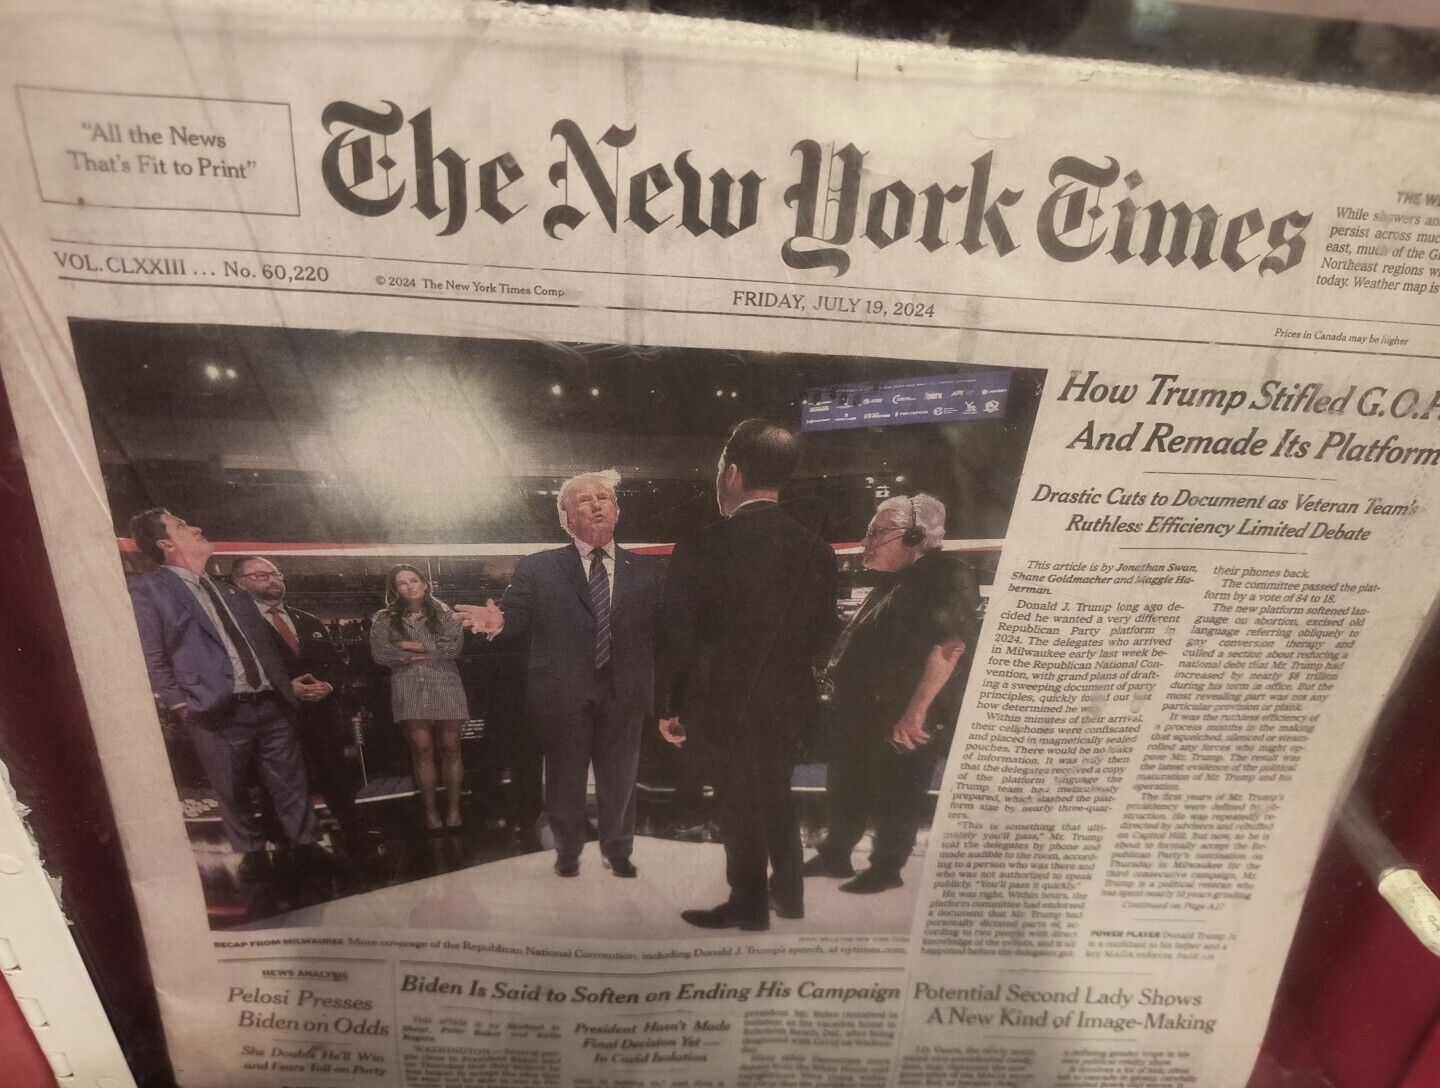 The New York Times Friday July 19 2024 How Trump Stifled G.O.P. And Remade It's